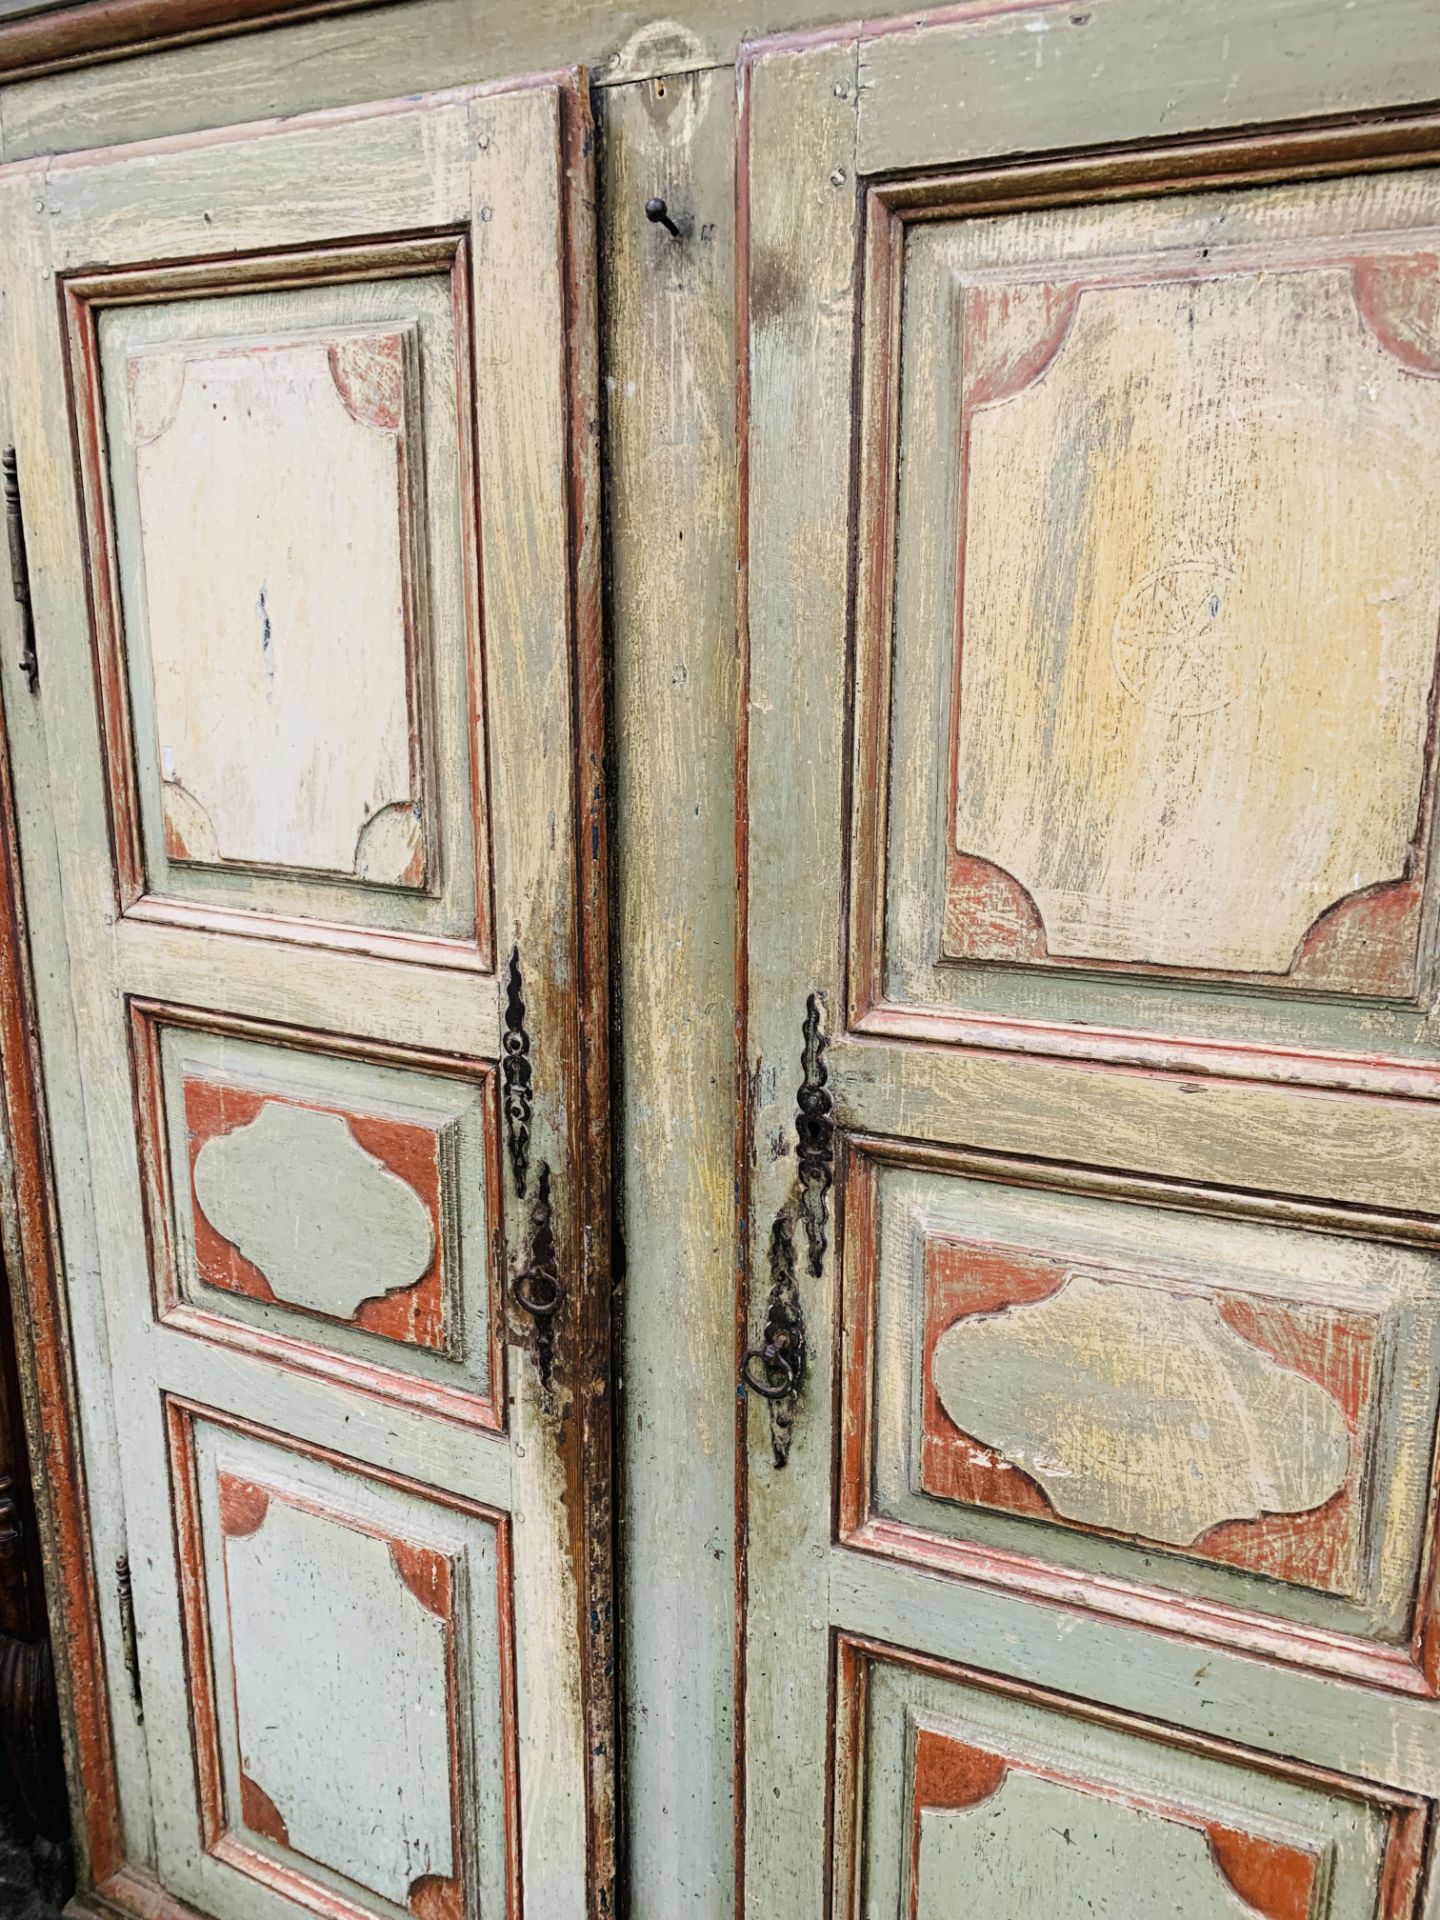 Mid-19th century French painted pine wardrobe - Image 8 of 8